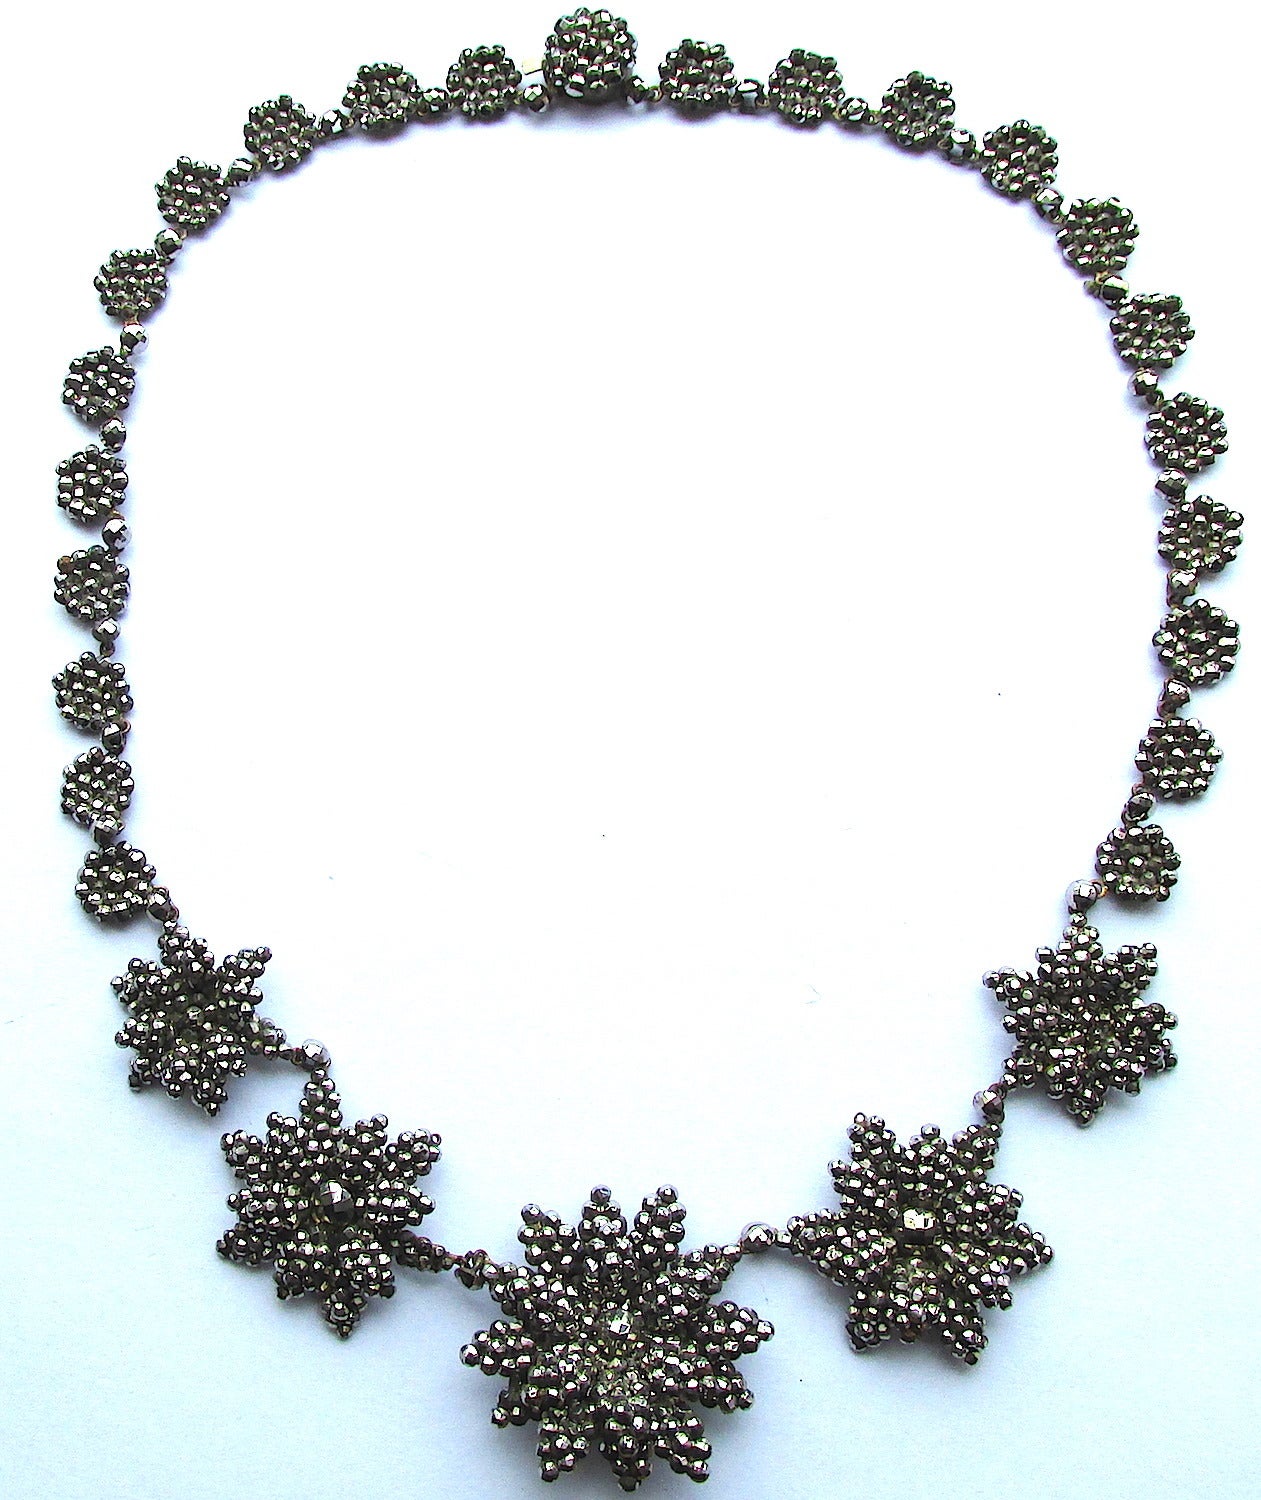 Elegant Victorian cut steel necklace with a floral motif of large multi-petaled flowers. Lovely to wear on elegant occasions as well on daily trips around town. The necklace is 17 3/4" long and measures 1" at its widest point. Cut steel